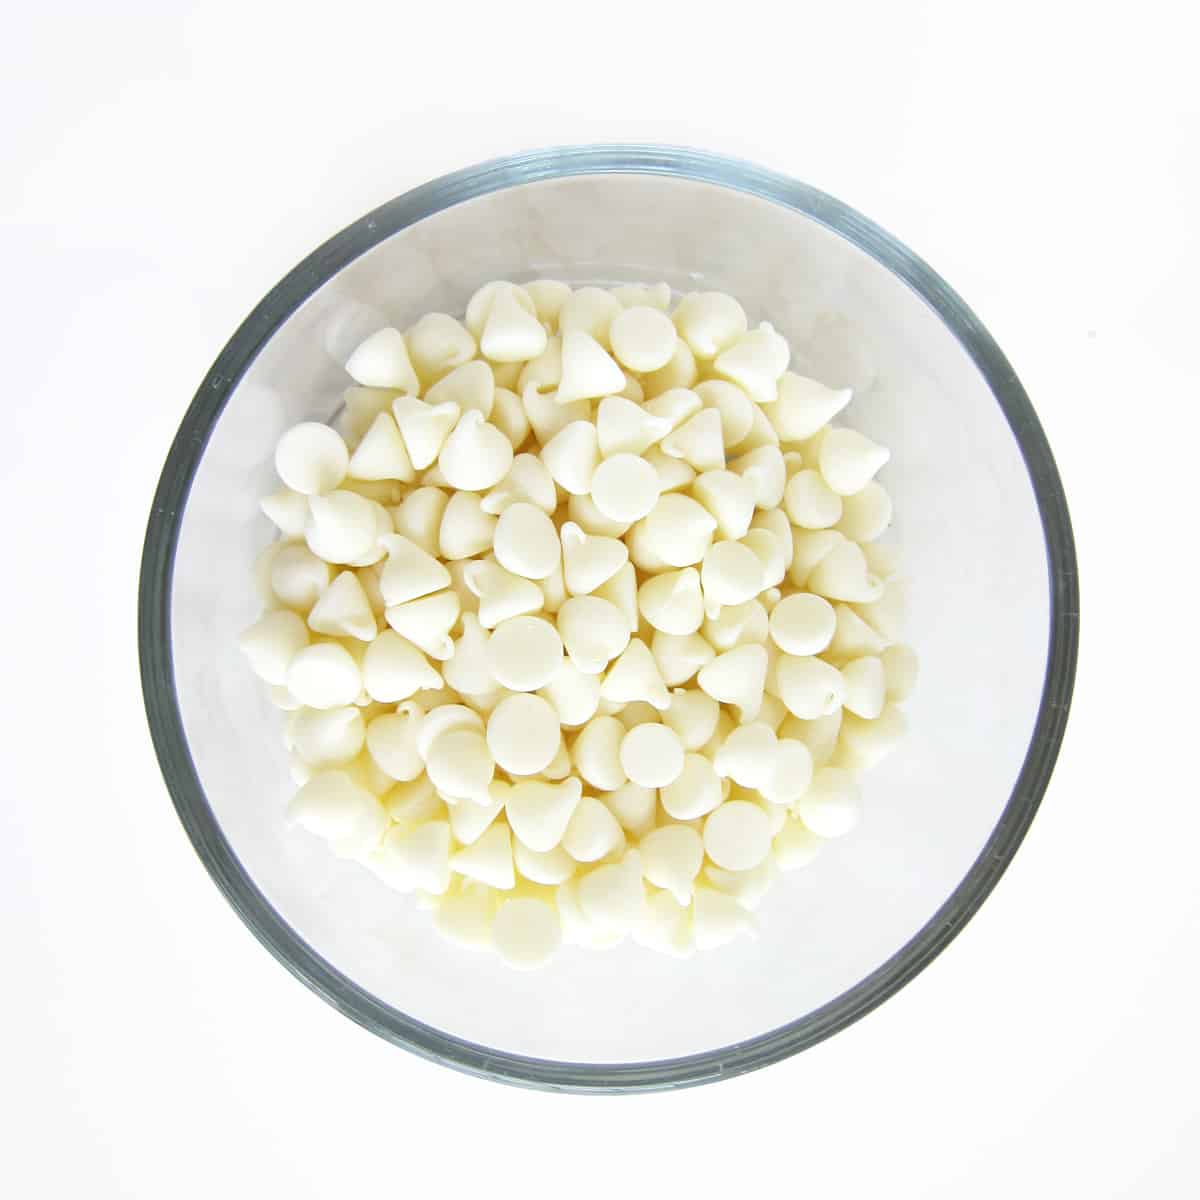 White chocolate chips in a small bowl.